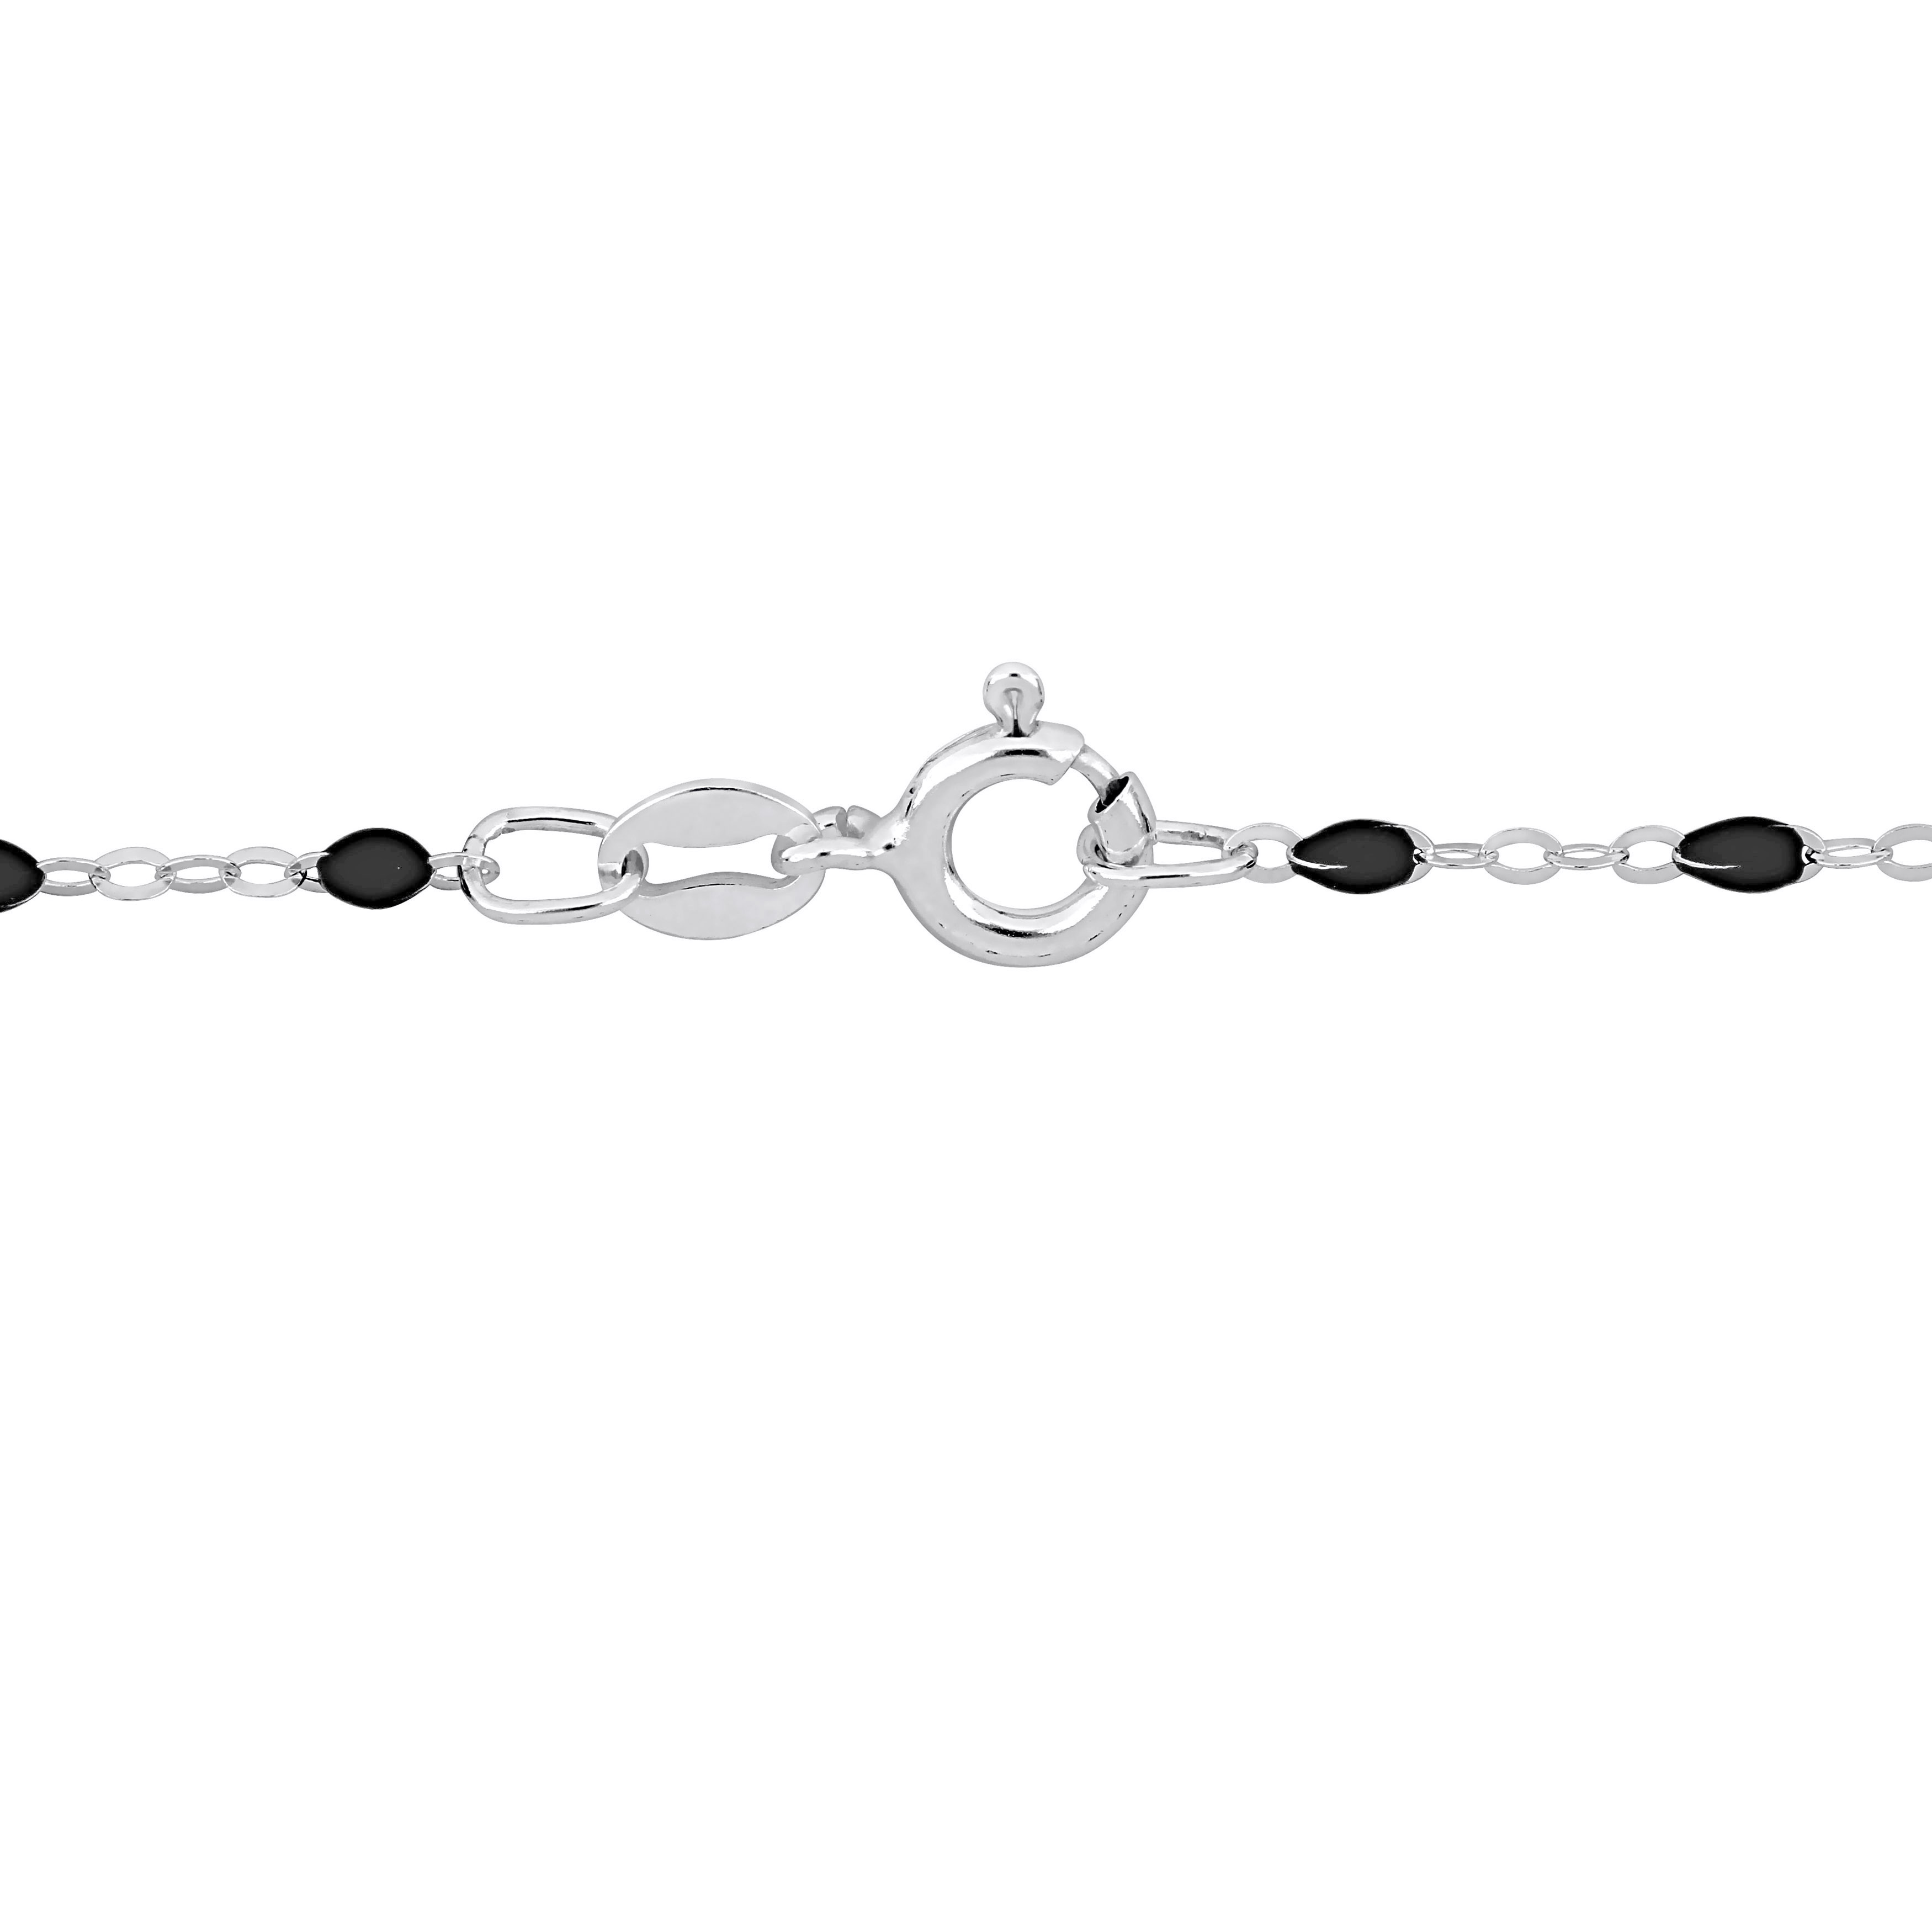 Black Enamel Bead Station Forzatina Brill Necklace in Sterling Silver - 18 in.